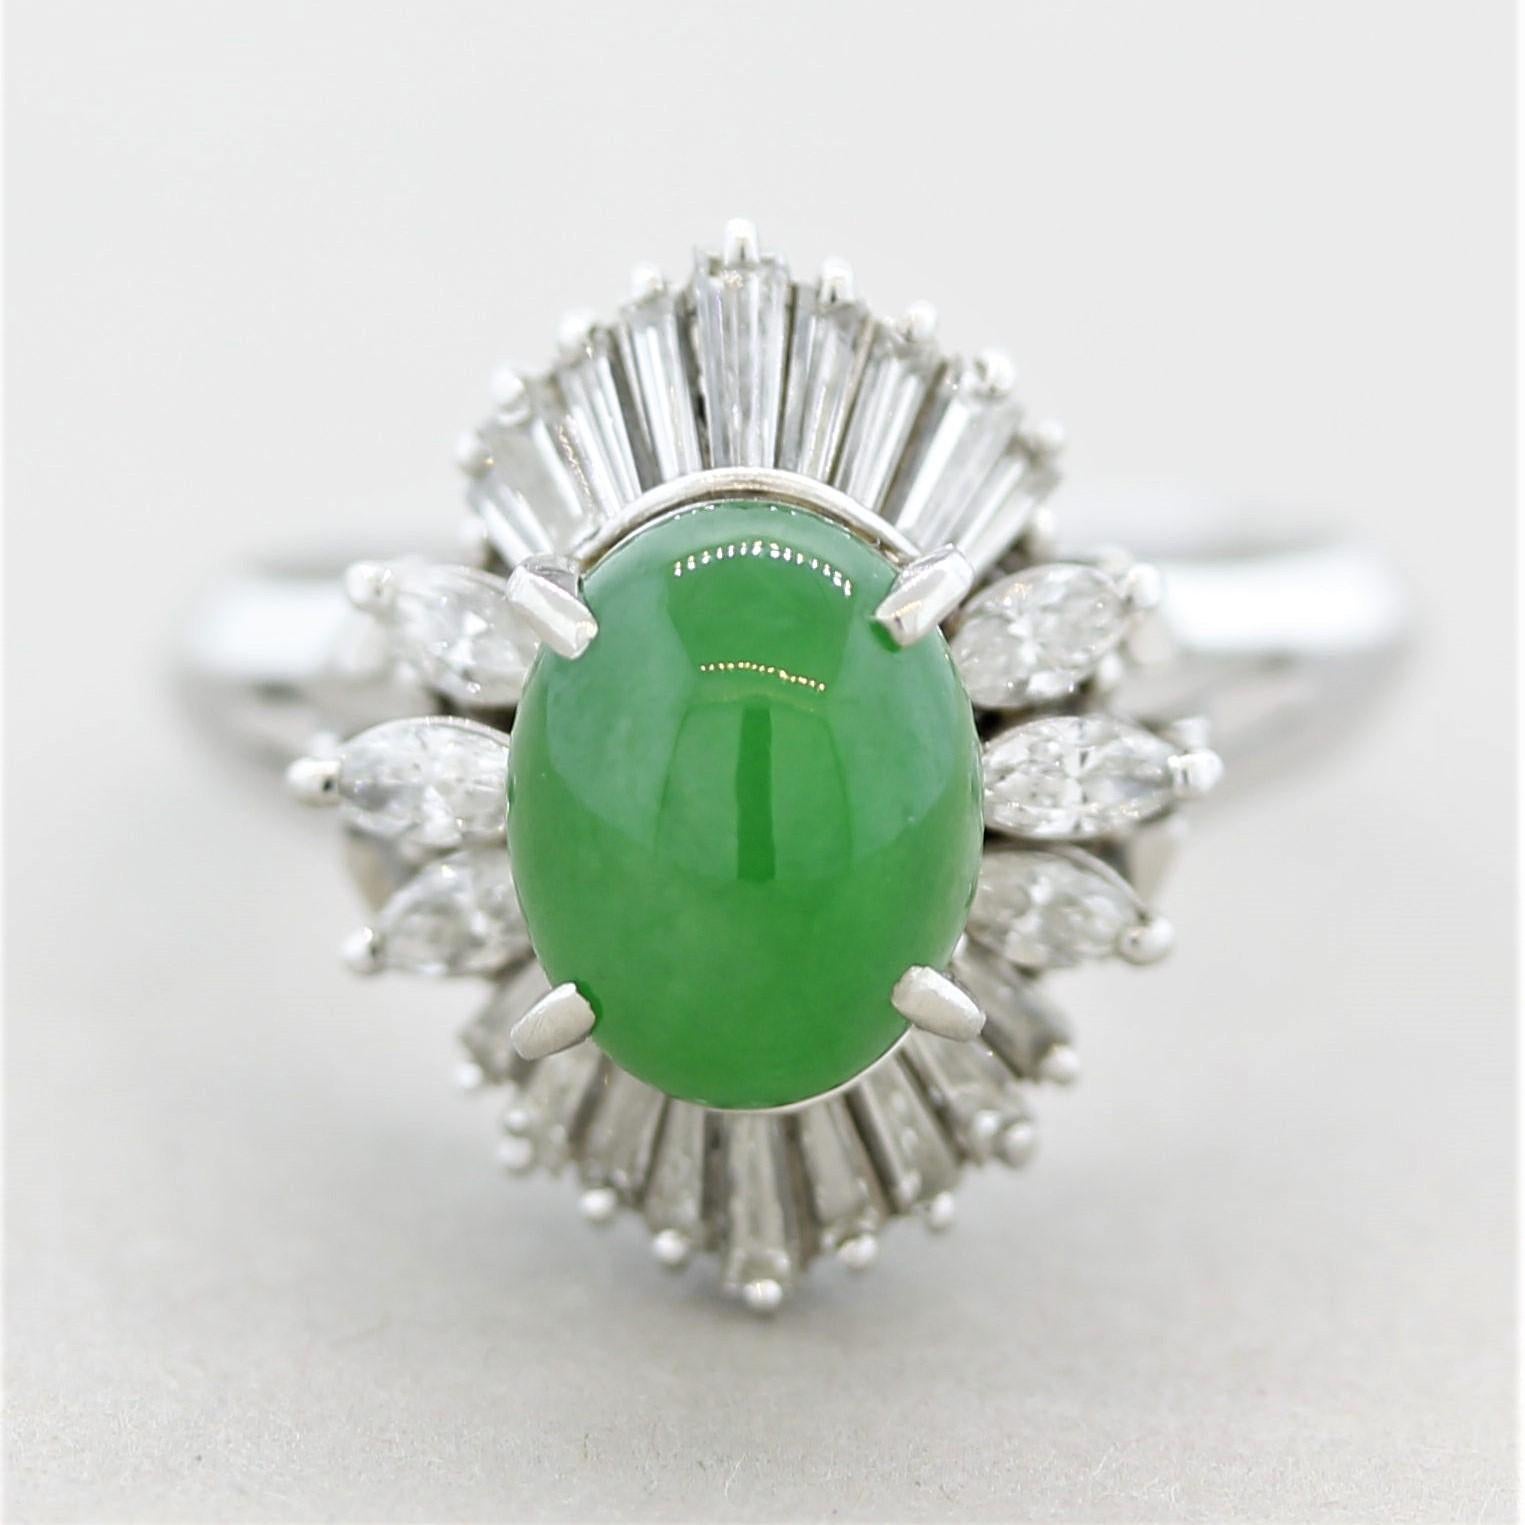 A sweet and stylish ring featuring a natural oval-shaped cabochon jade! It has an evenly colored bright-green color with excellent luster. The stone weighs approximately 2 carats and is accented by 0.87 carats of marquise-shape and baguette-cut